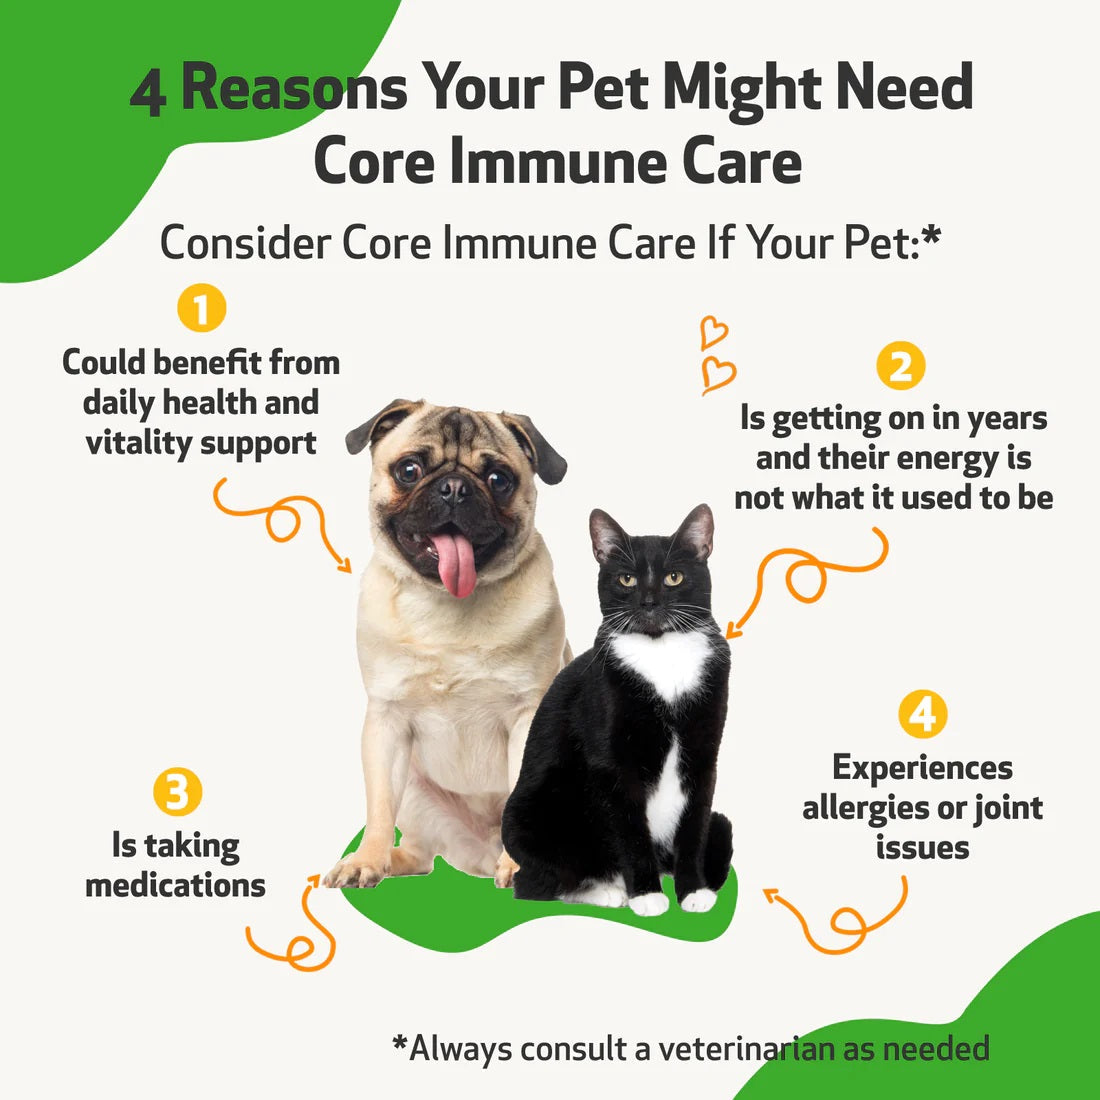 Pet Wellbeing - Core Immune CARE (105g) for Canine & Feline